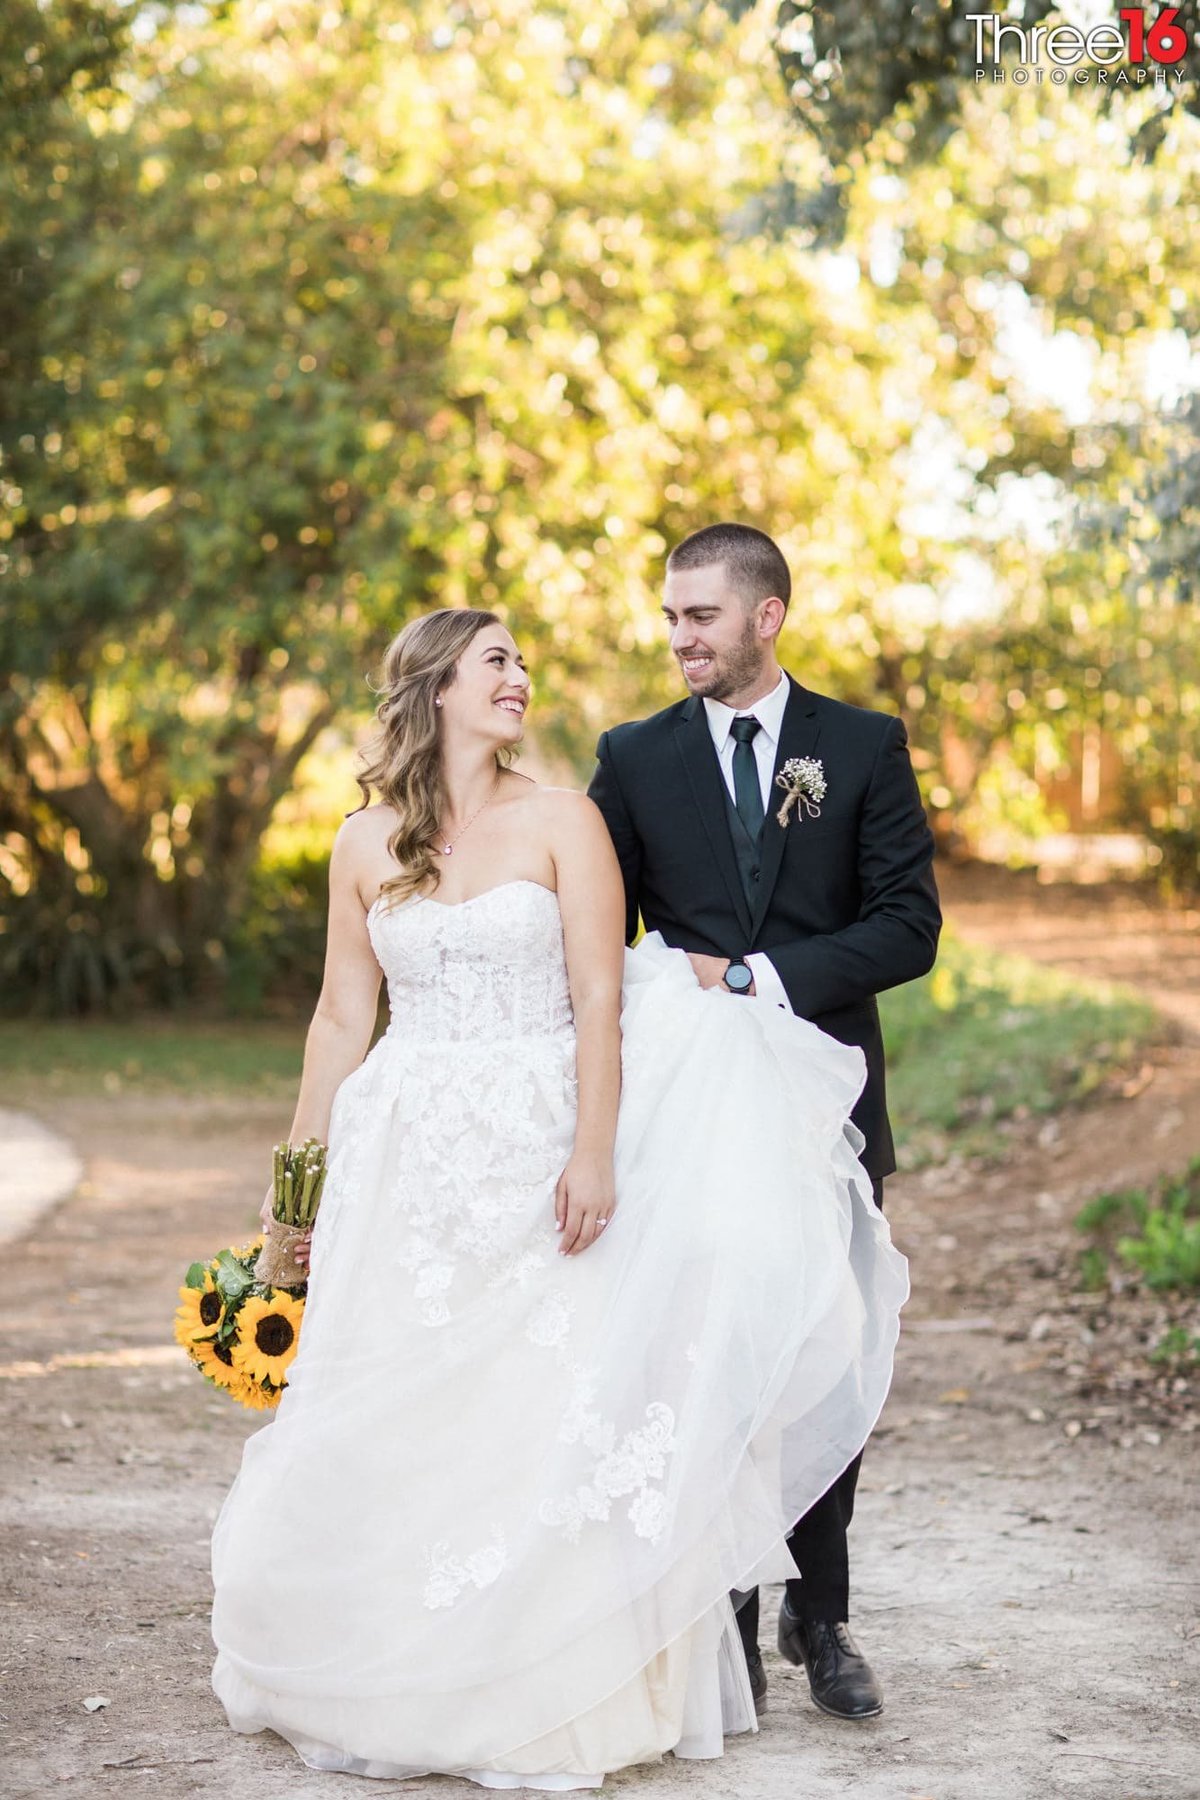 Bride looks back at her Groom as he carries her dress train while walking across a field of dirt